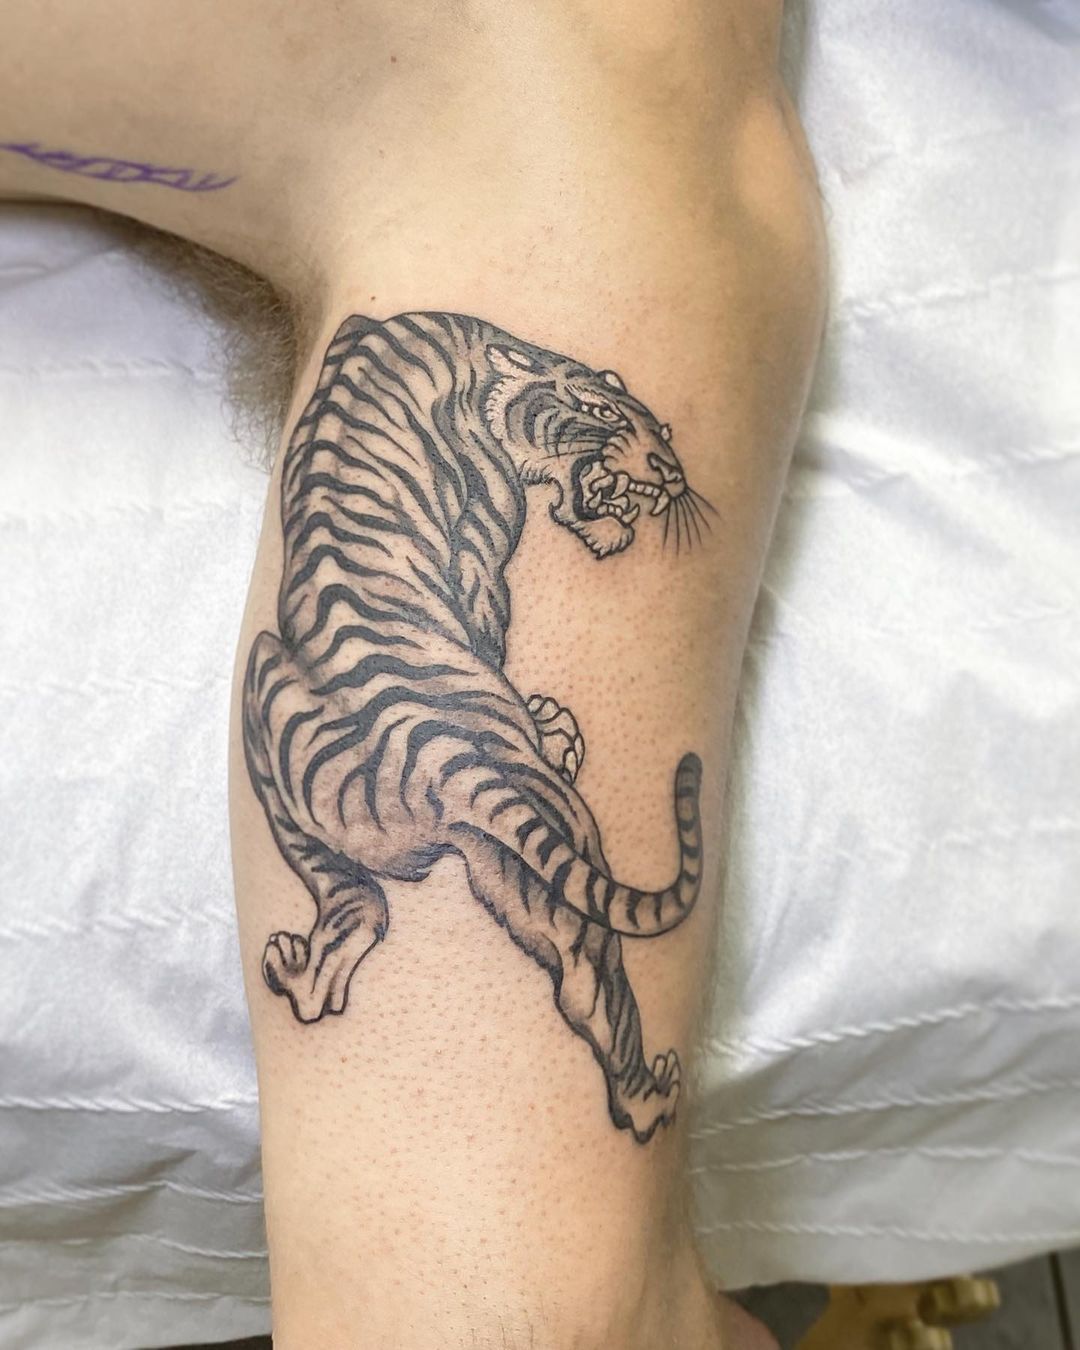 Deadman Tattoos Glasgow - a crouching tiger, the first sign of the upcoming  sleeve full of Japanese stuff. it's gonna be an extraordinary eye candy!  tattoo by Agata Szczuko Tattoos&Designs #tiger #crouchingtiger #